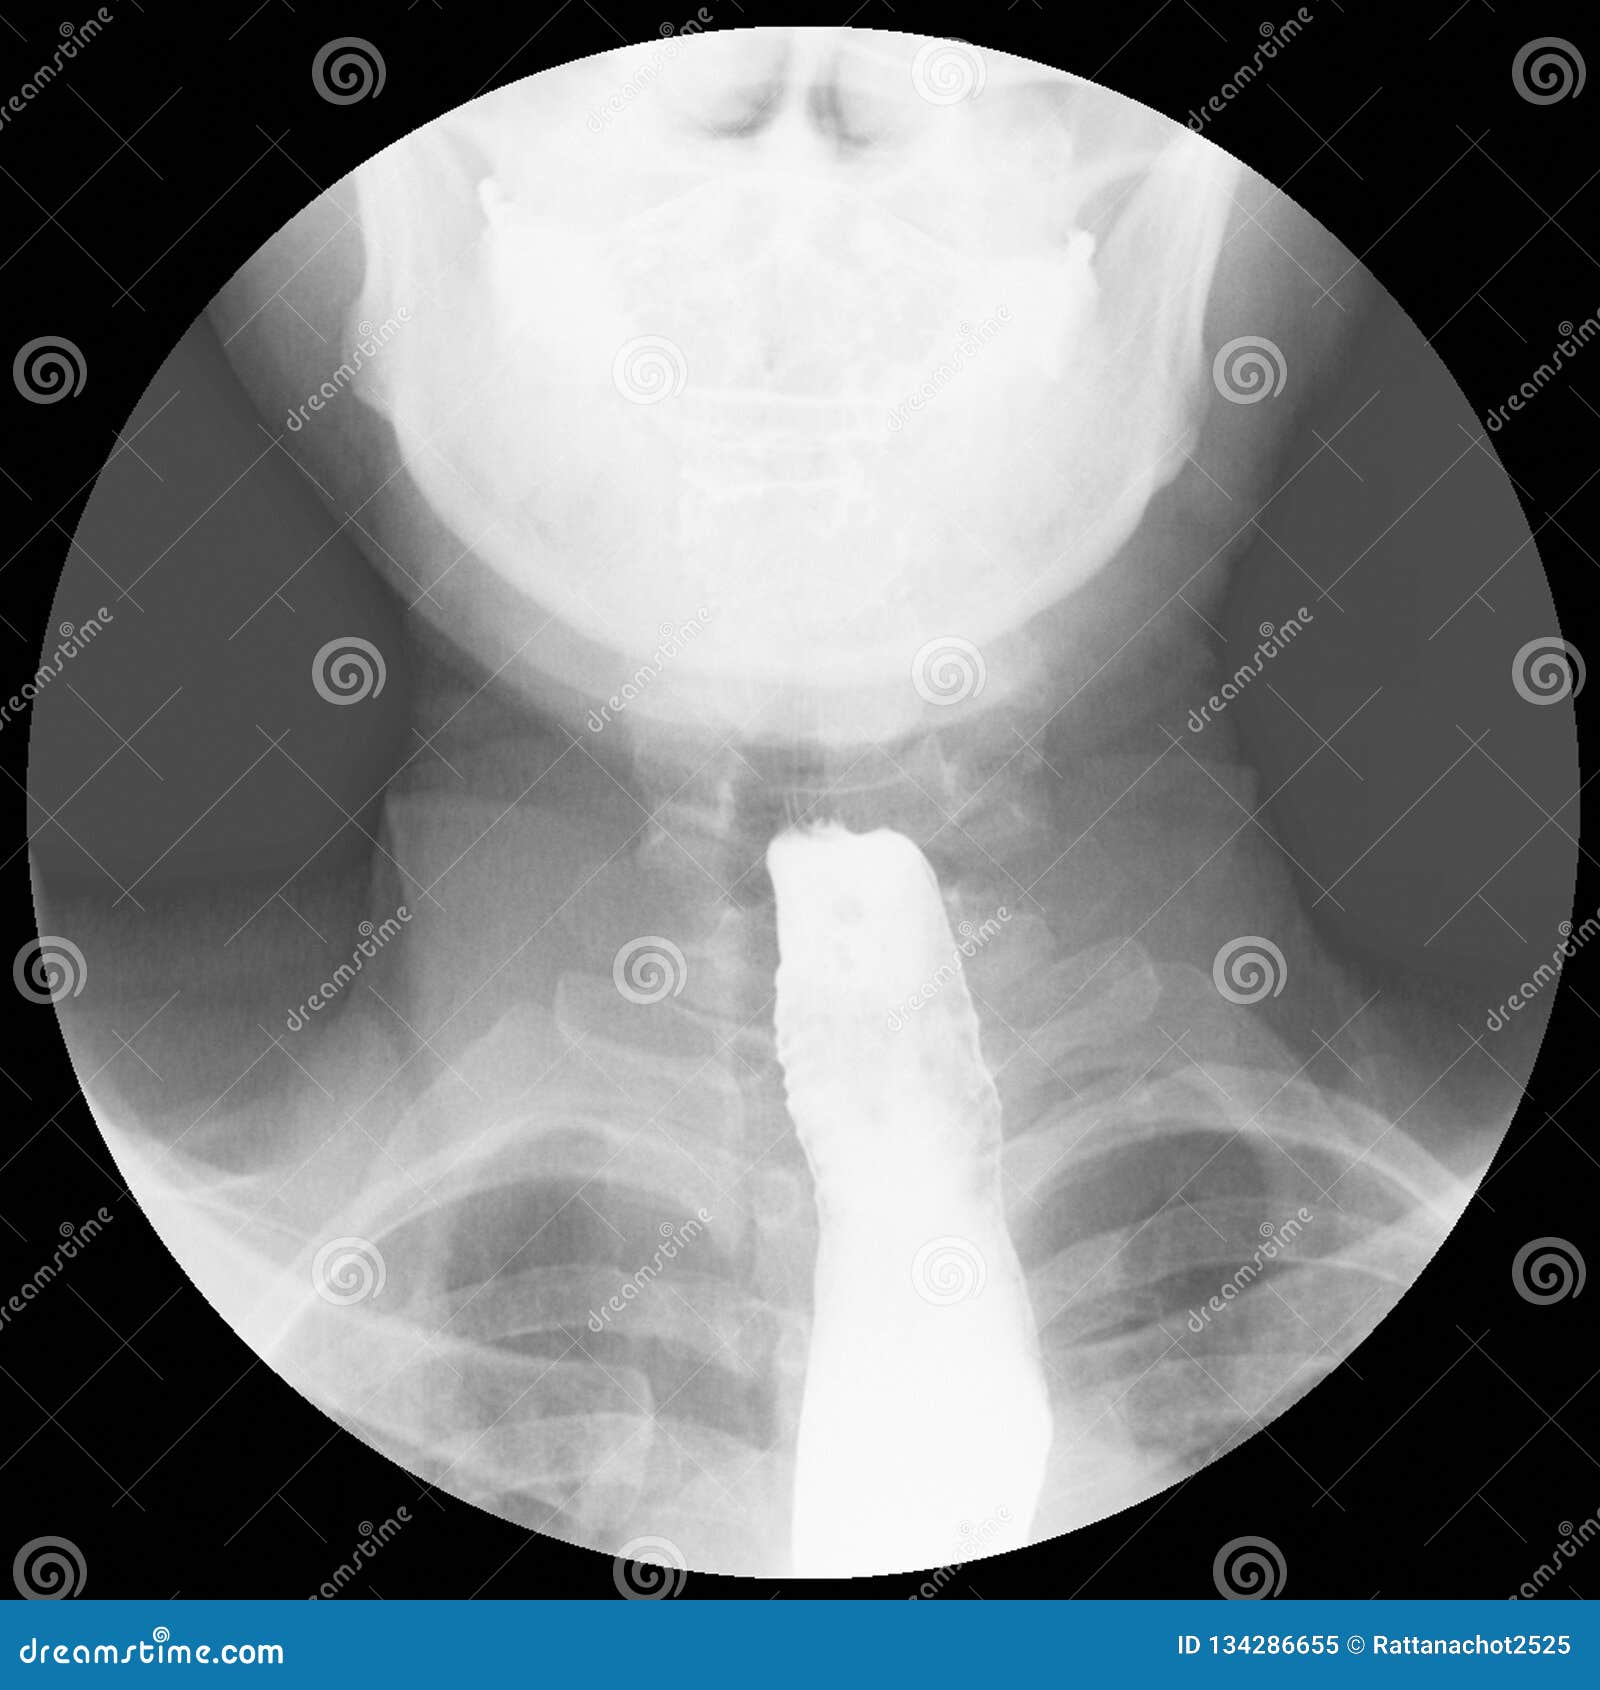 barium swallow evidence of achalasia at distal esophagus to eg junction.moderate proximal dialtation of esophagus with